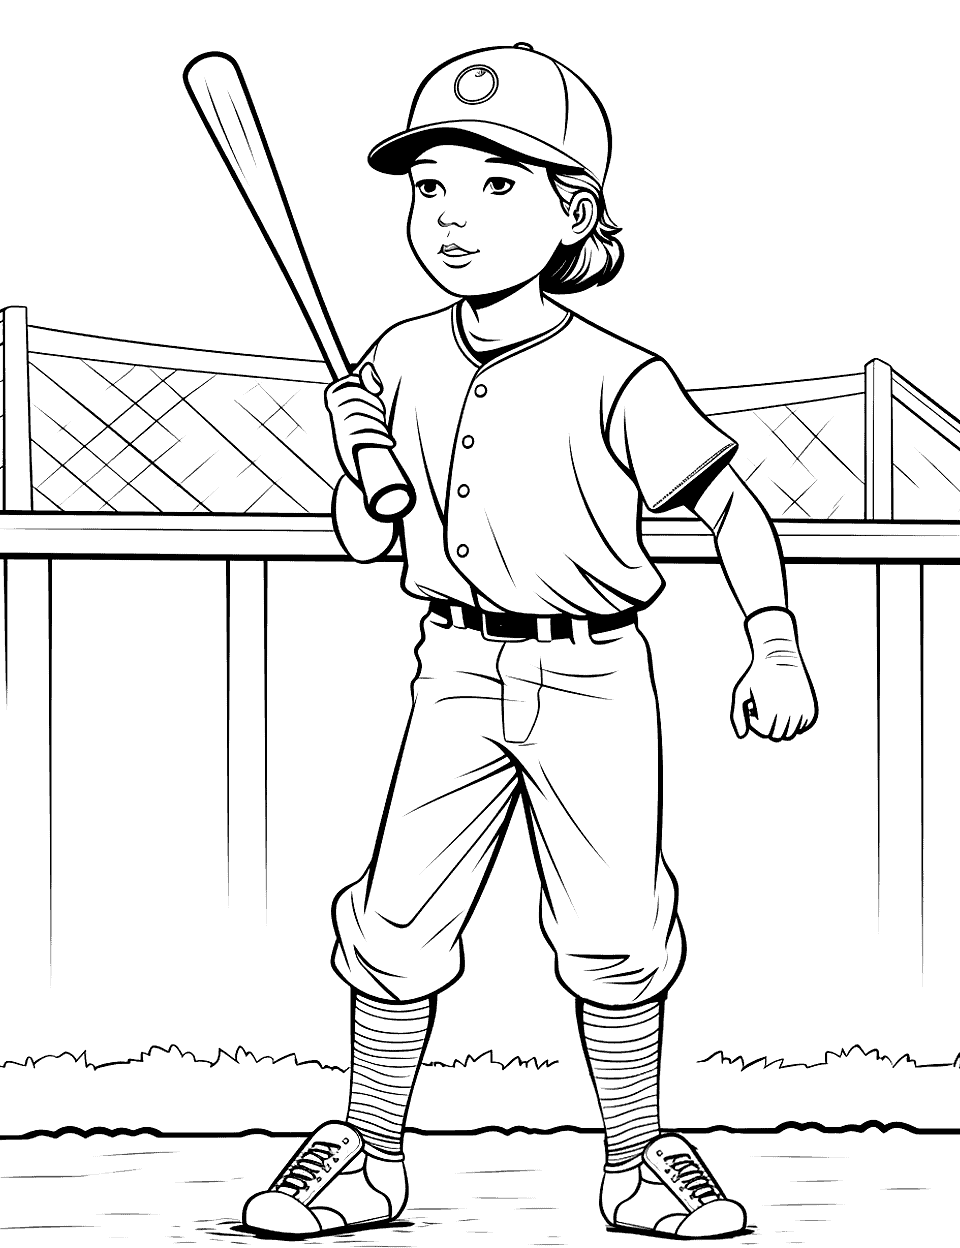 Rising Star Rookie Baseball Coloring Page - A rookie player confidently stepping up to bat, with a hopeful and determined look.